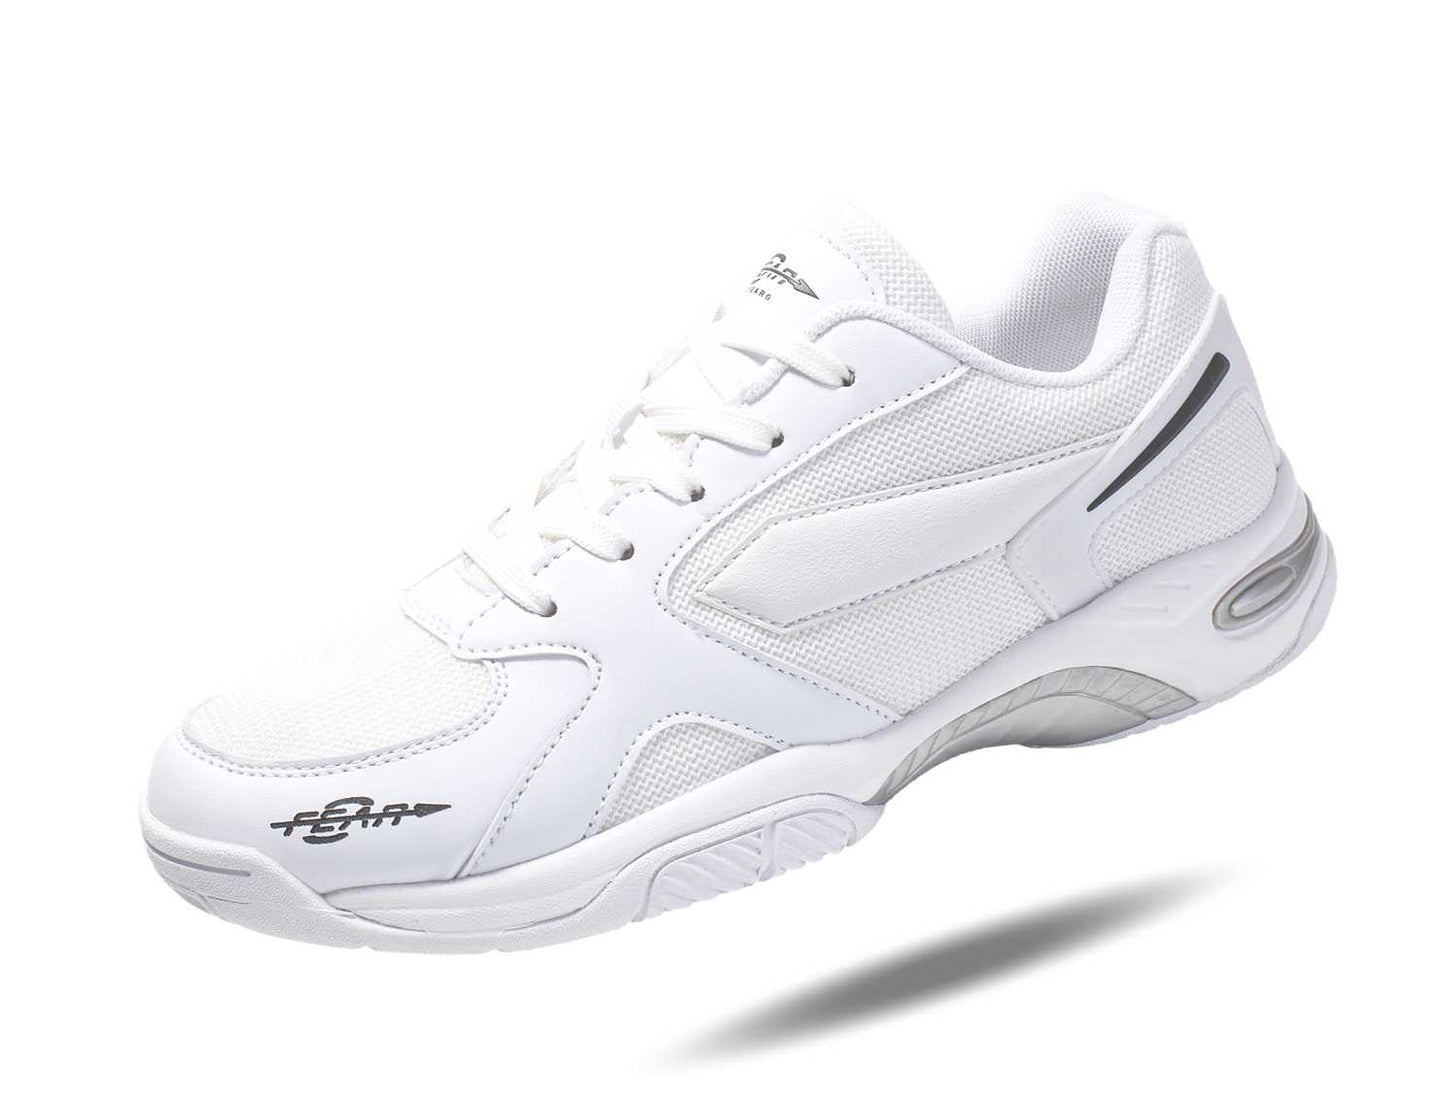 Fear0 NJ Men's High Arch Firm Support All-In-One White Walking Shoes Raspberry Smoke Online Store